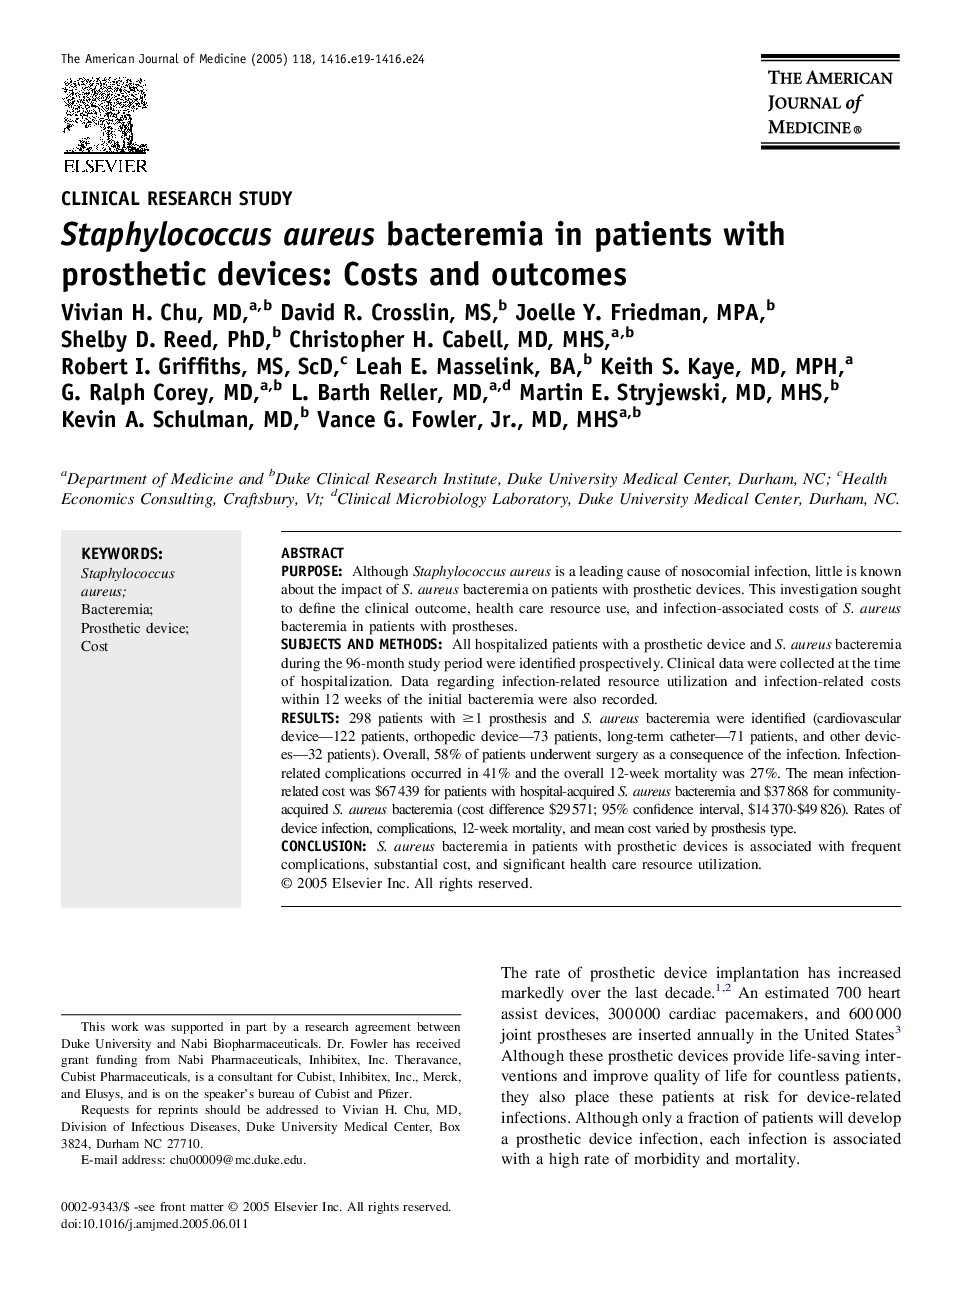 Staphylococcus aureus bacteremia in patients with prosthetic devices: Costs and outcomes